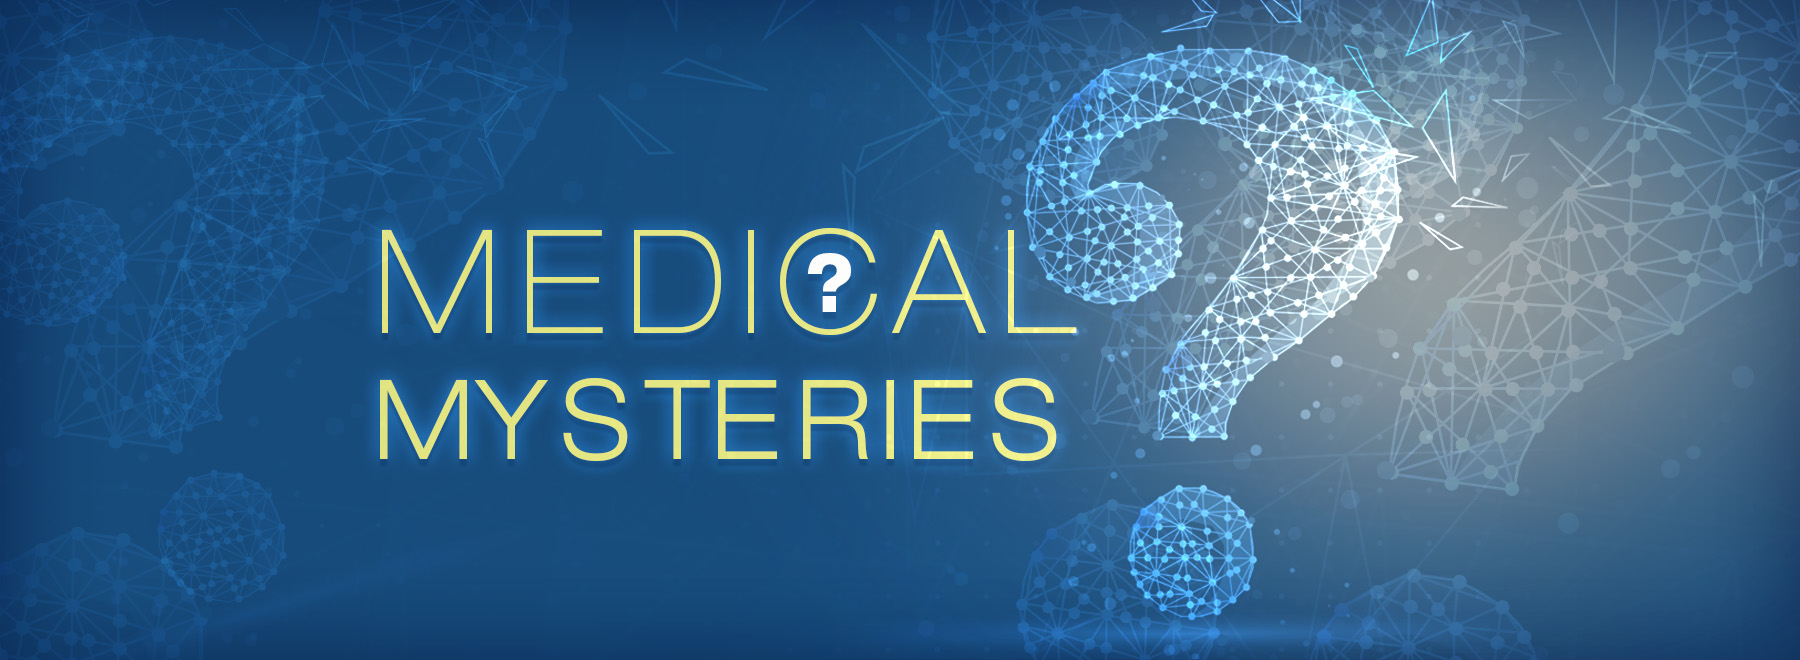 Medical Mysteries Art with question mark background